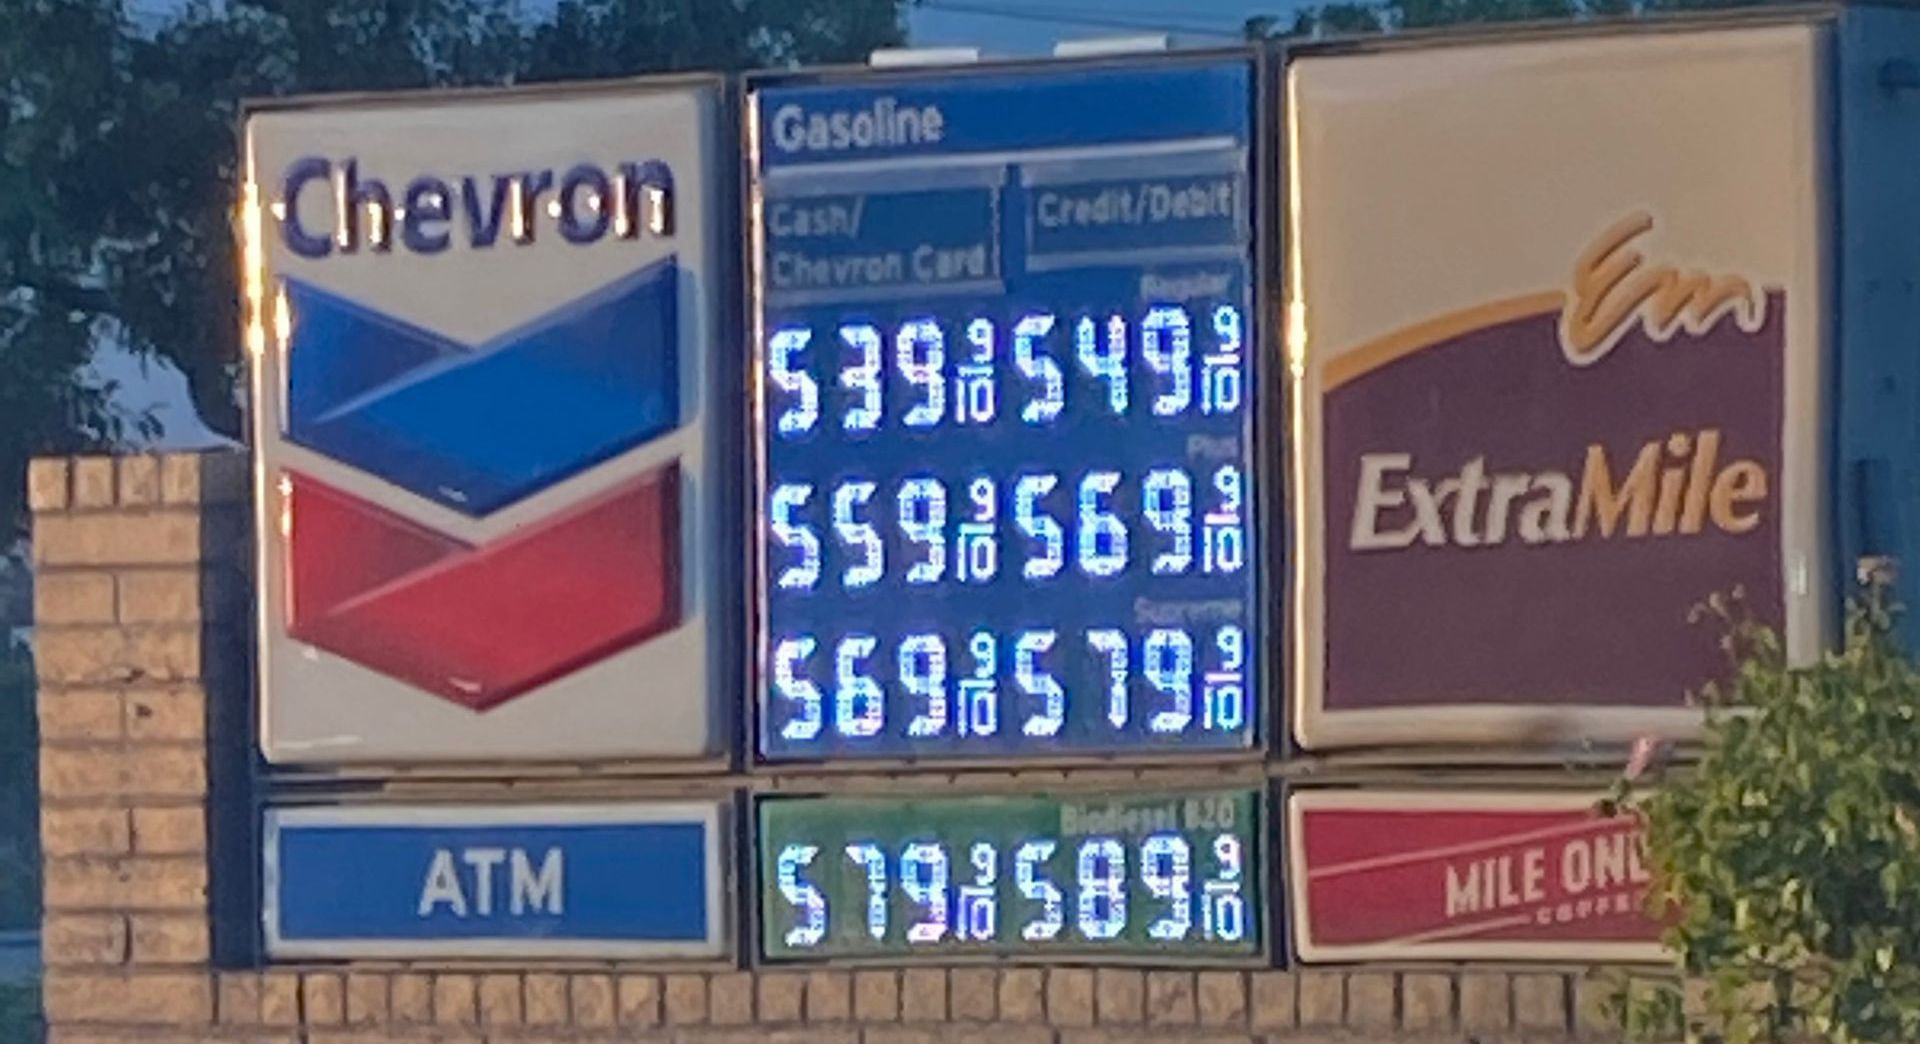 Dual Pricing - Gas Station